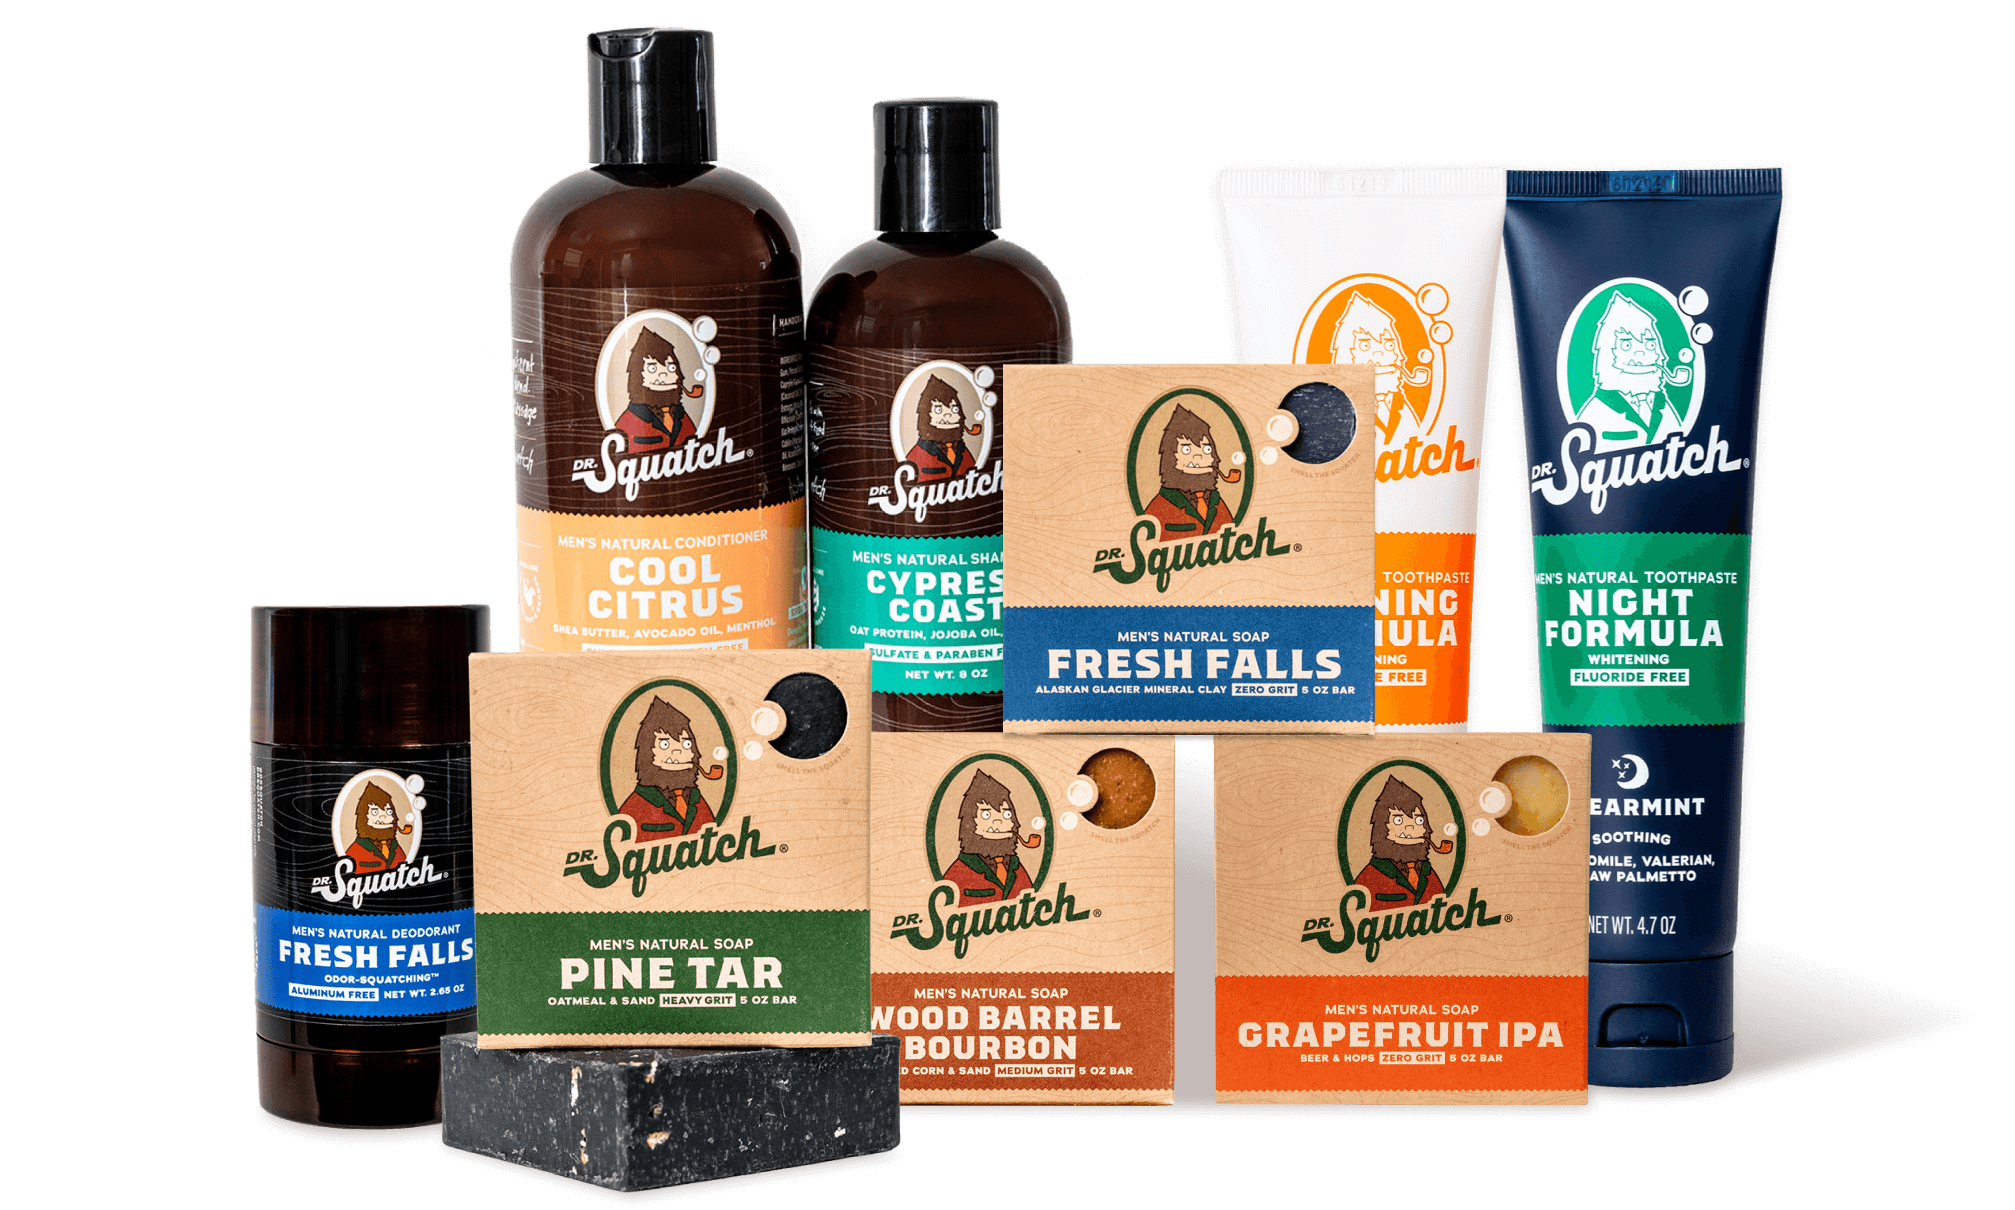 Dr. Squatch Men's Bar Soap and Hair Care Beach Expanded Pack: Men's Natural Bar Soap: Coconut Castaway Cool Fresh Aloe Shampoo and Conditioner Set Co